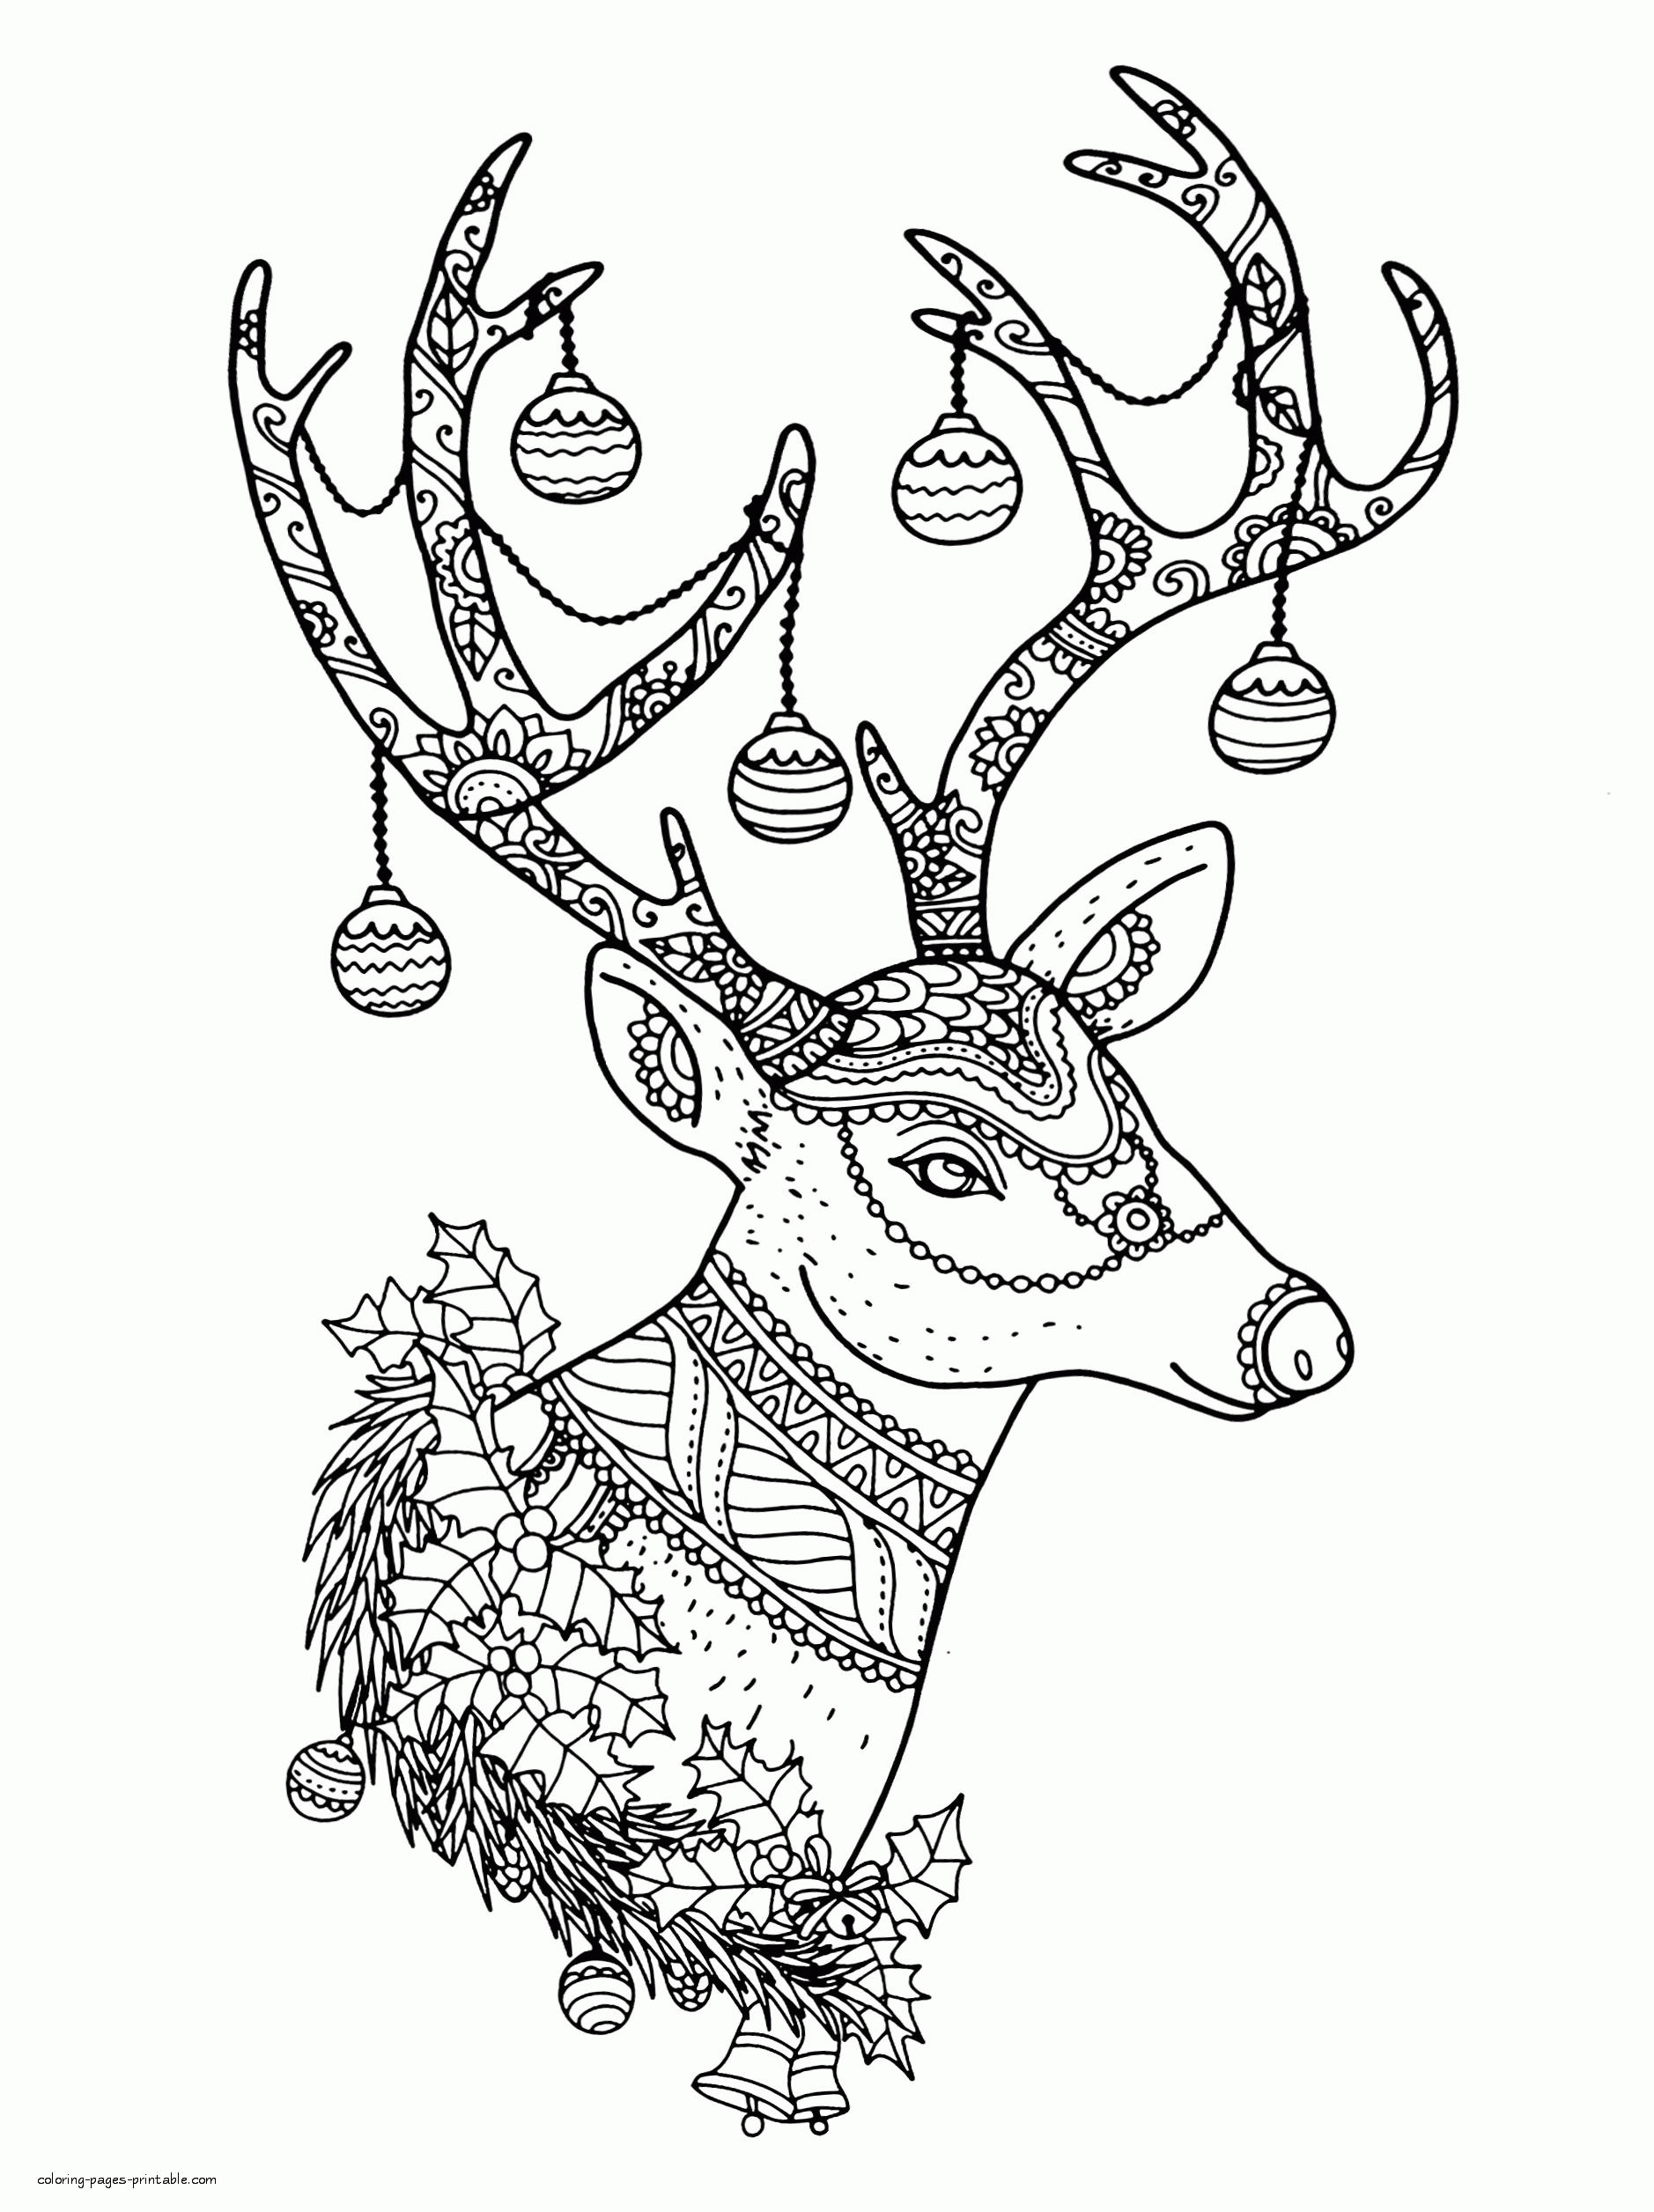 Free Christmas Reindeer Colouring Pages For Adults